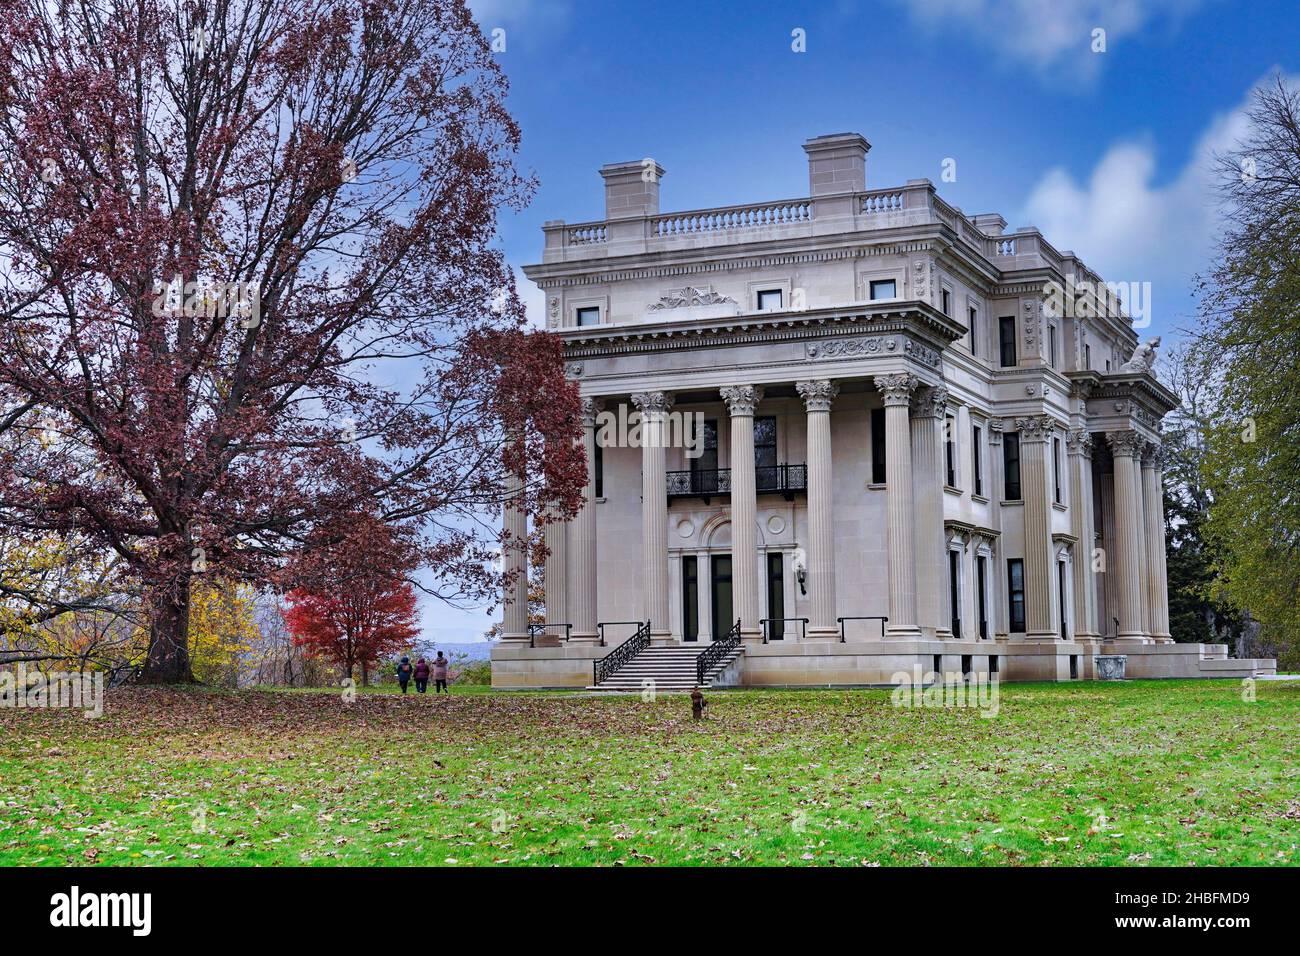 United States National Park Service's historic Vanderbilt Mansion, in a scenic park overlooking the Hudson River Valley Stock Photo